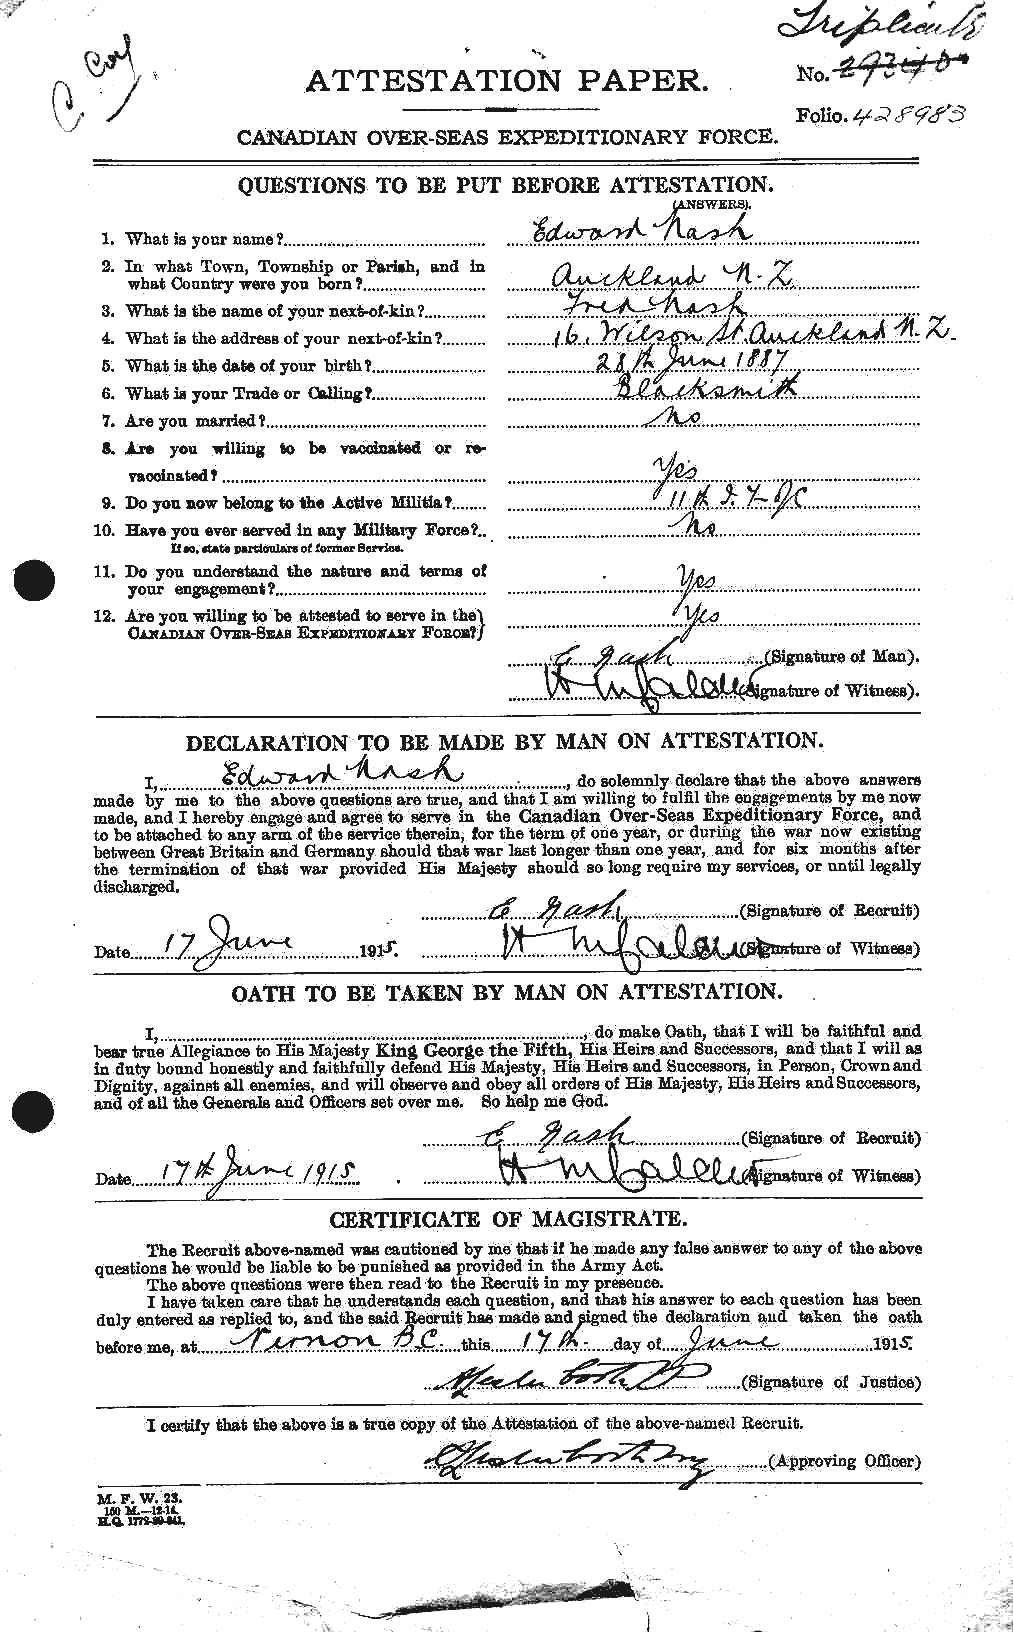 Personnel Records of the First World War - CEF 548934a